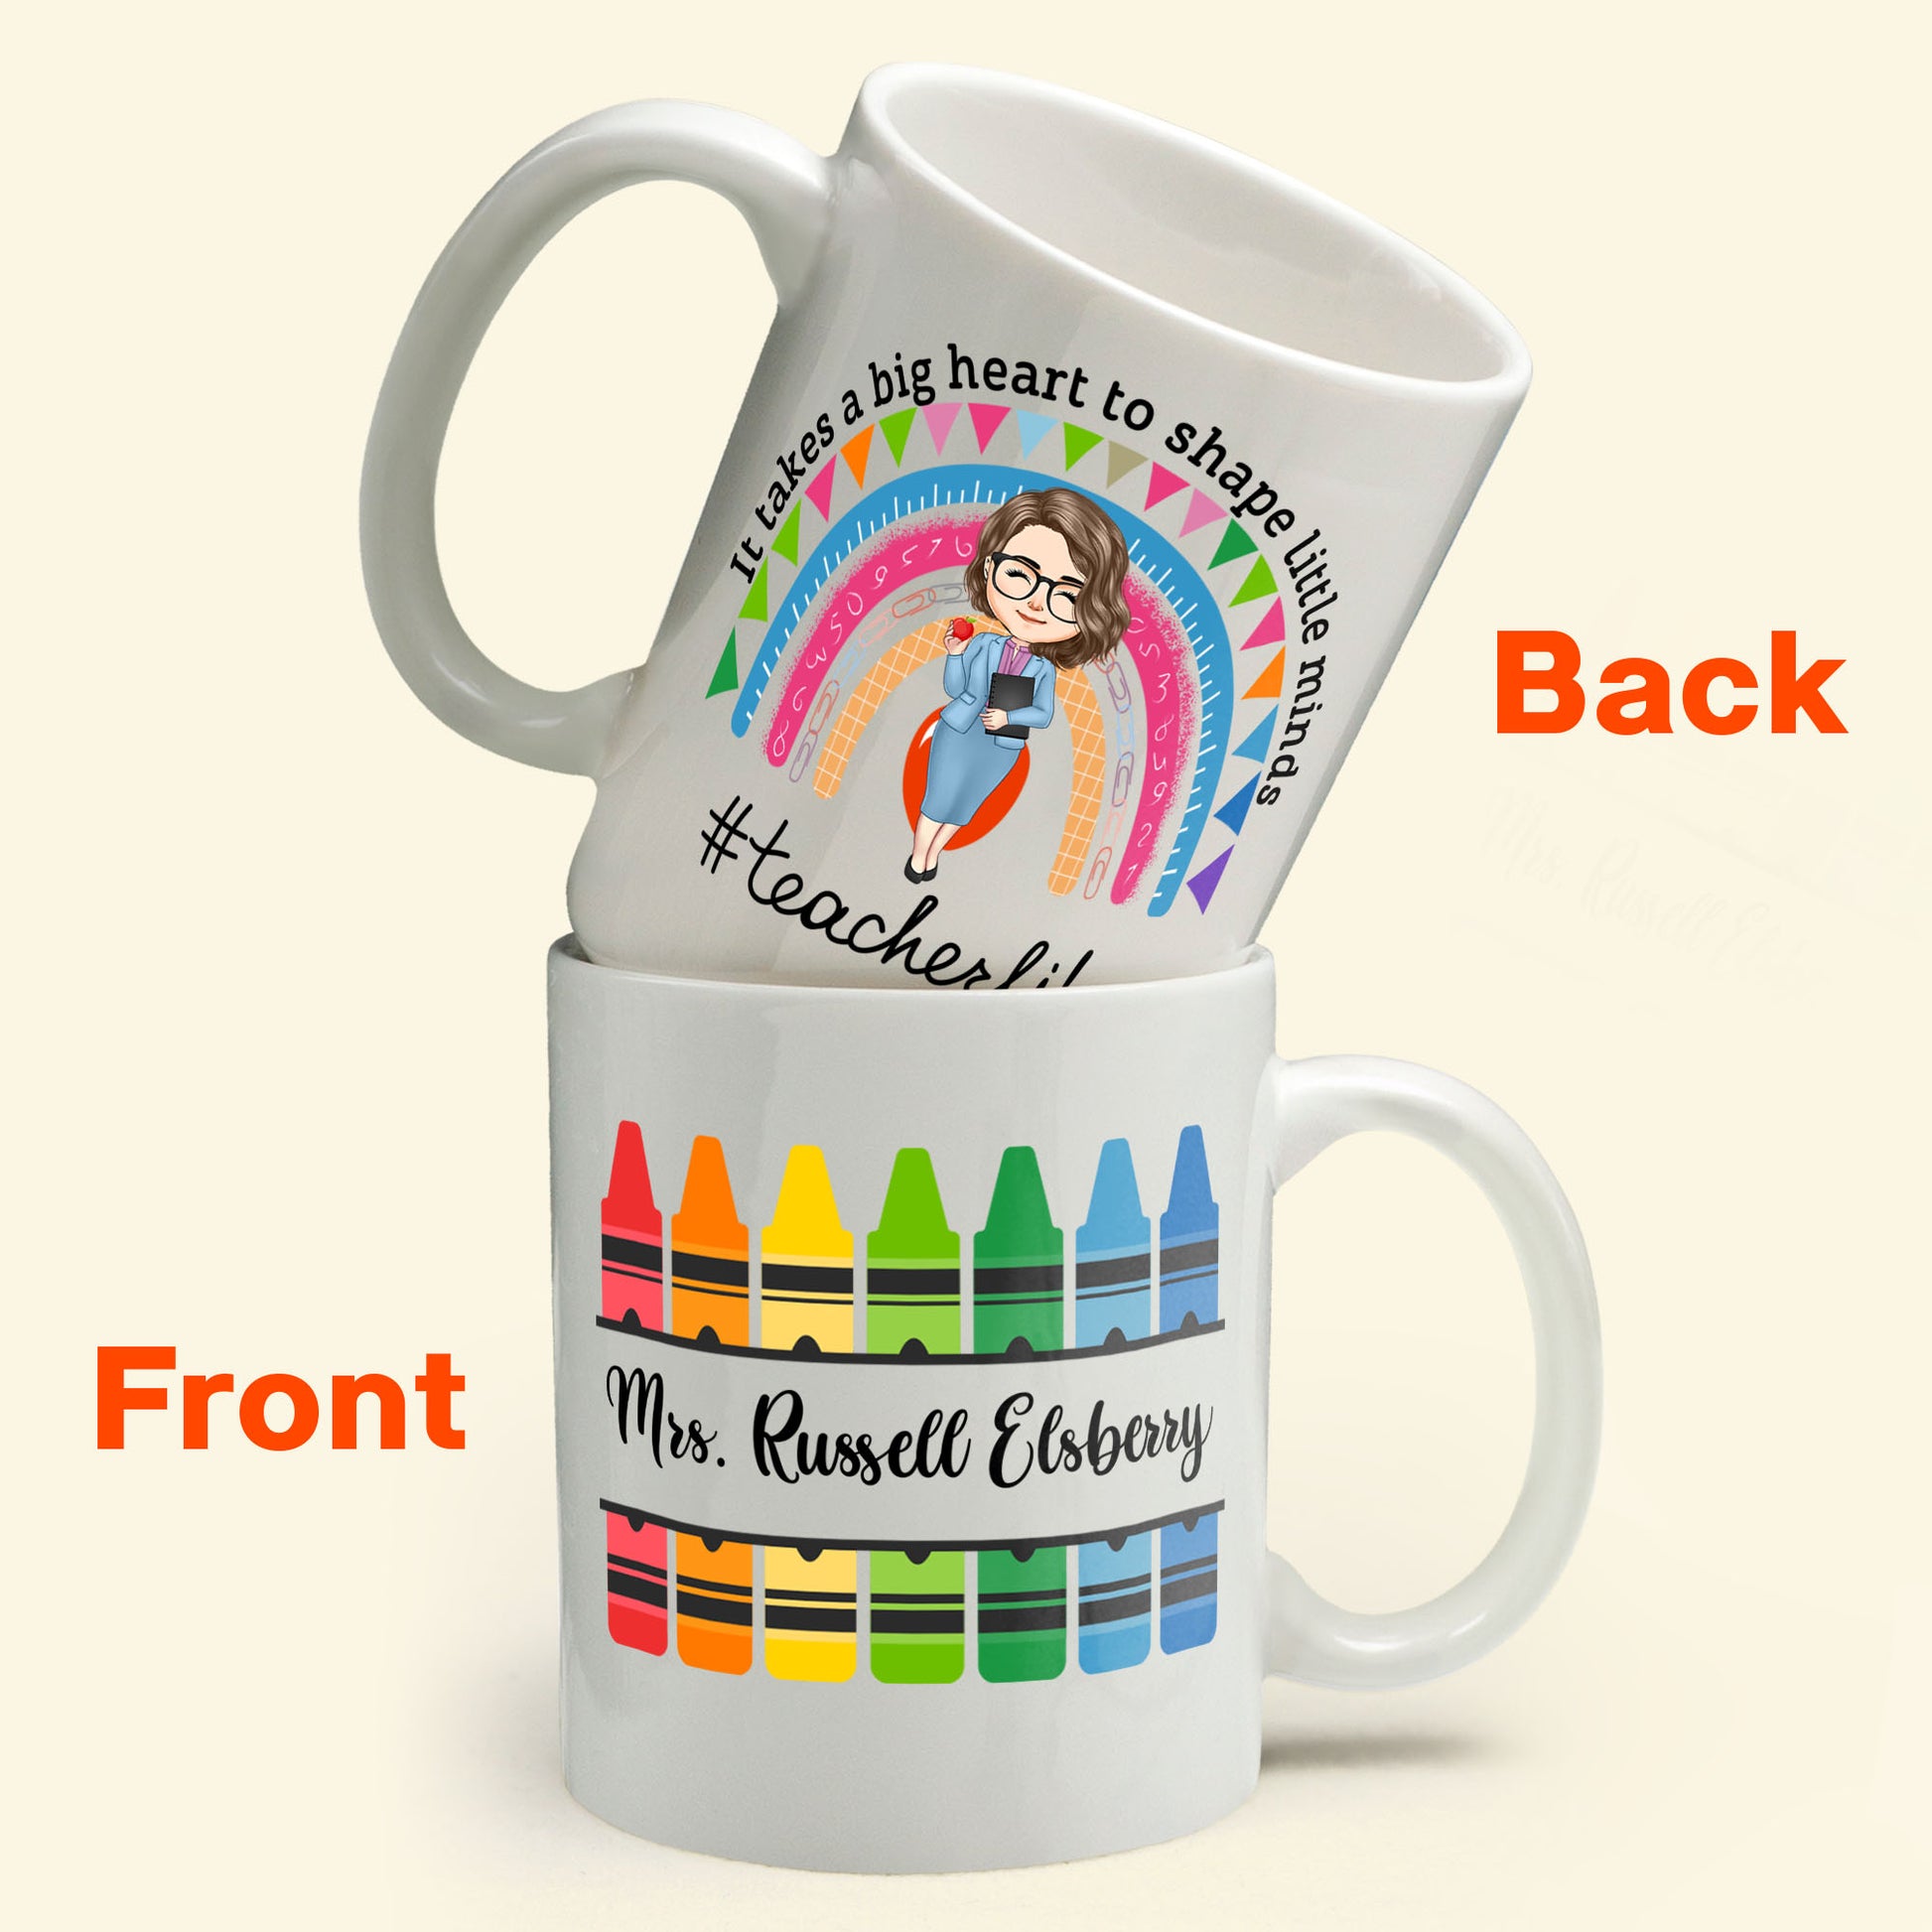 A Big Heart Shapes Little Minds - Personalized Mug - Back To School Gift For Teacher, 1st Day Of School, New Teacher Gift